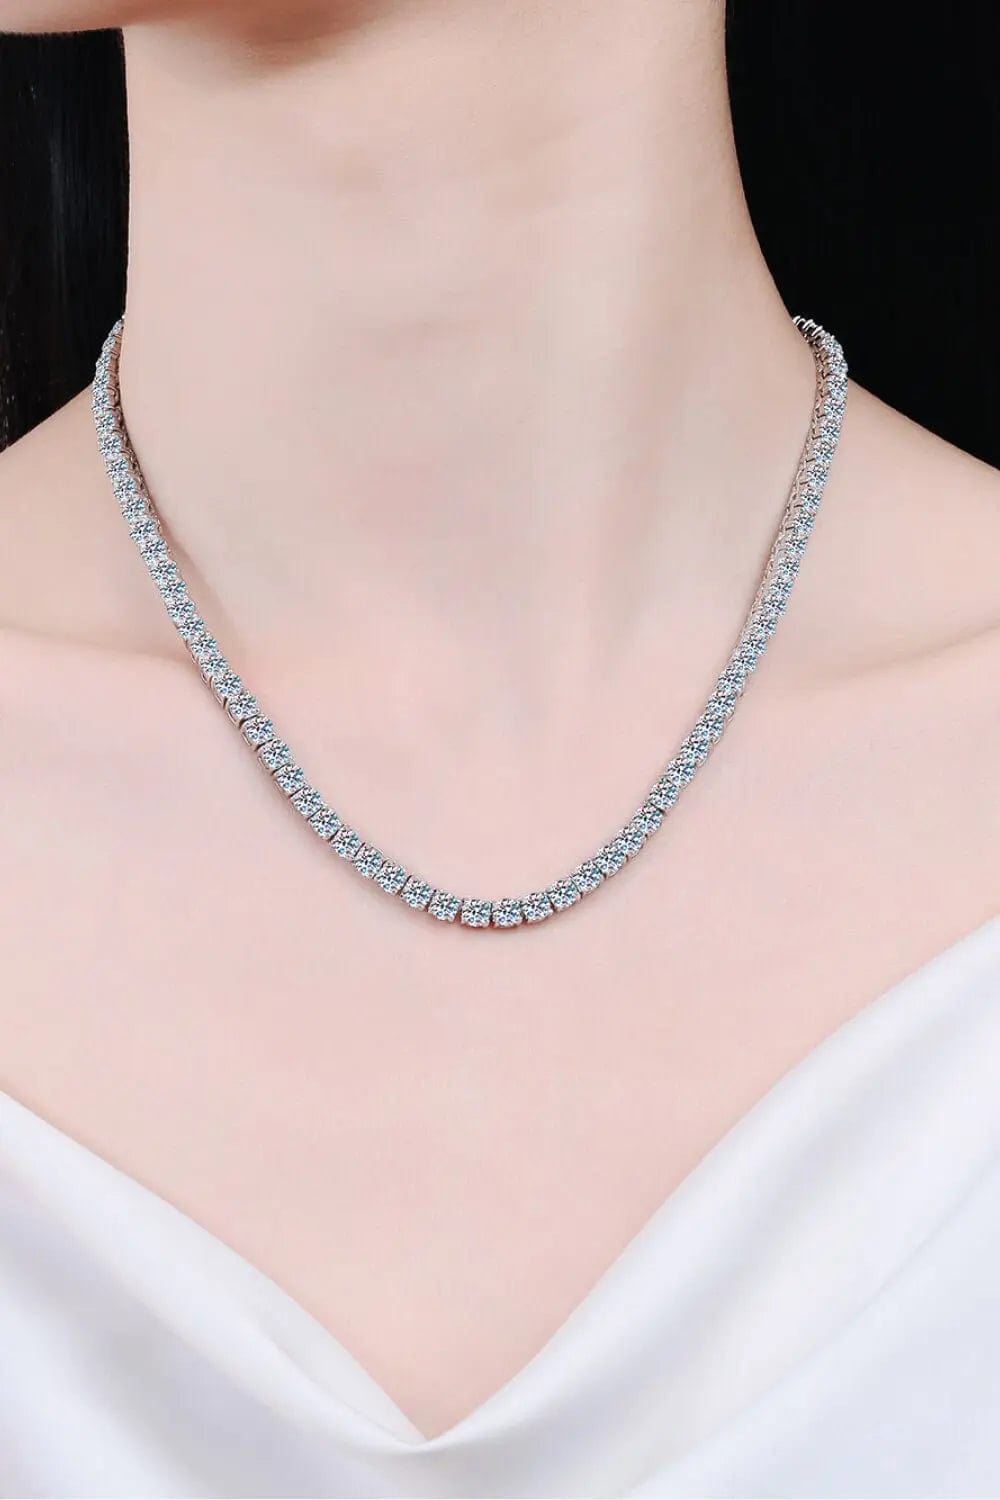 Moissanite Rhodium-Plated Necklace - CLASSY CLOSET BOUTIQUEMoissanite Rhodium-Plated Necklaceluxury100100161414310100100161414310SilverOne Size